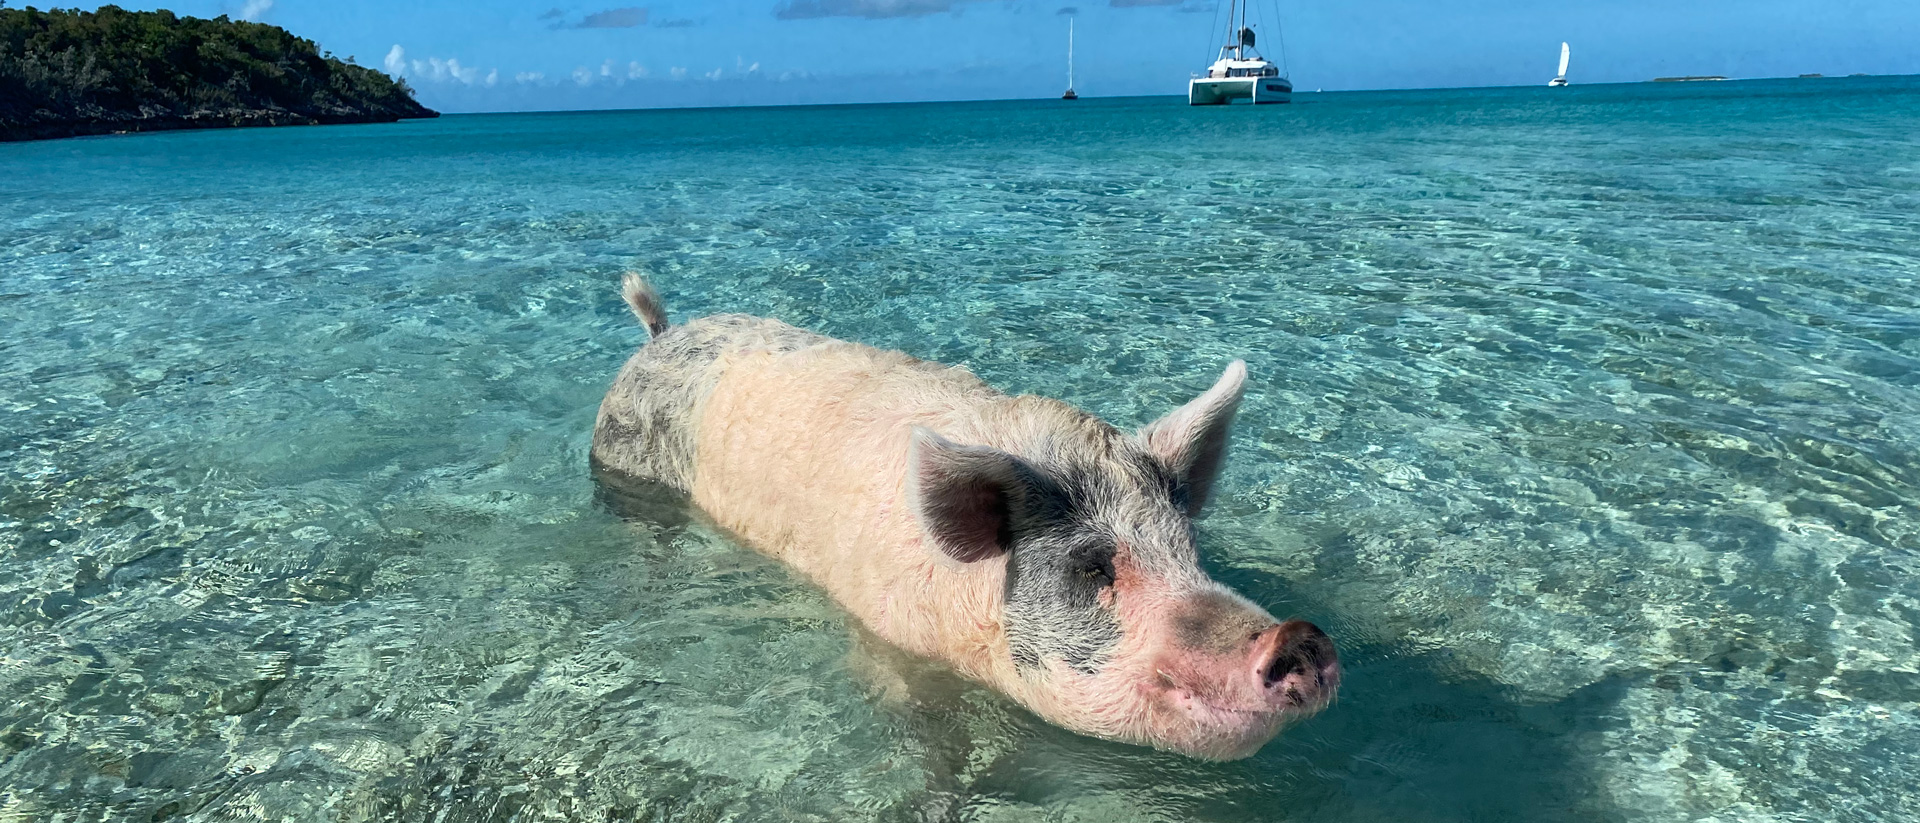 pig in water at beach on exumas exursion